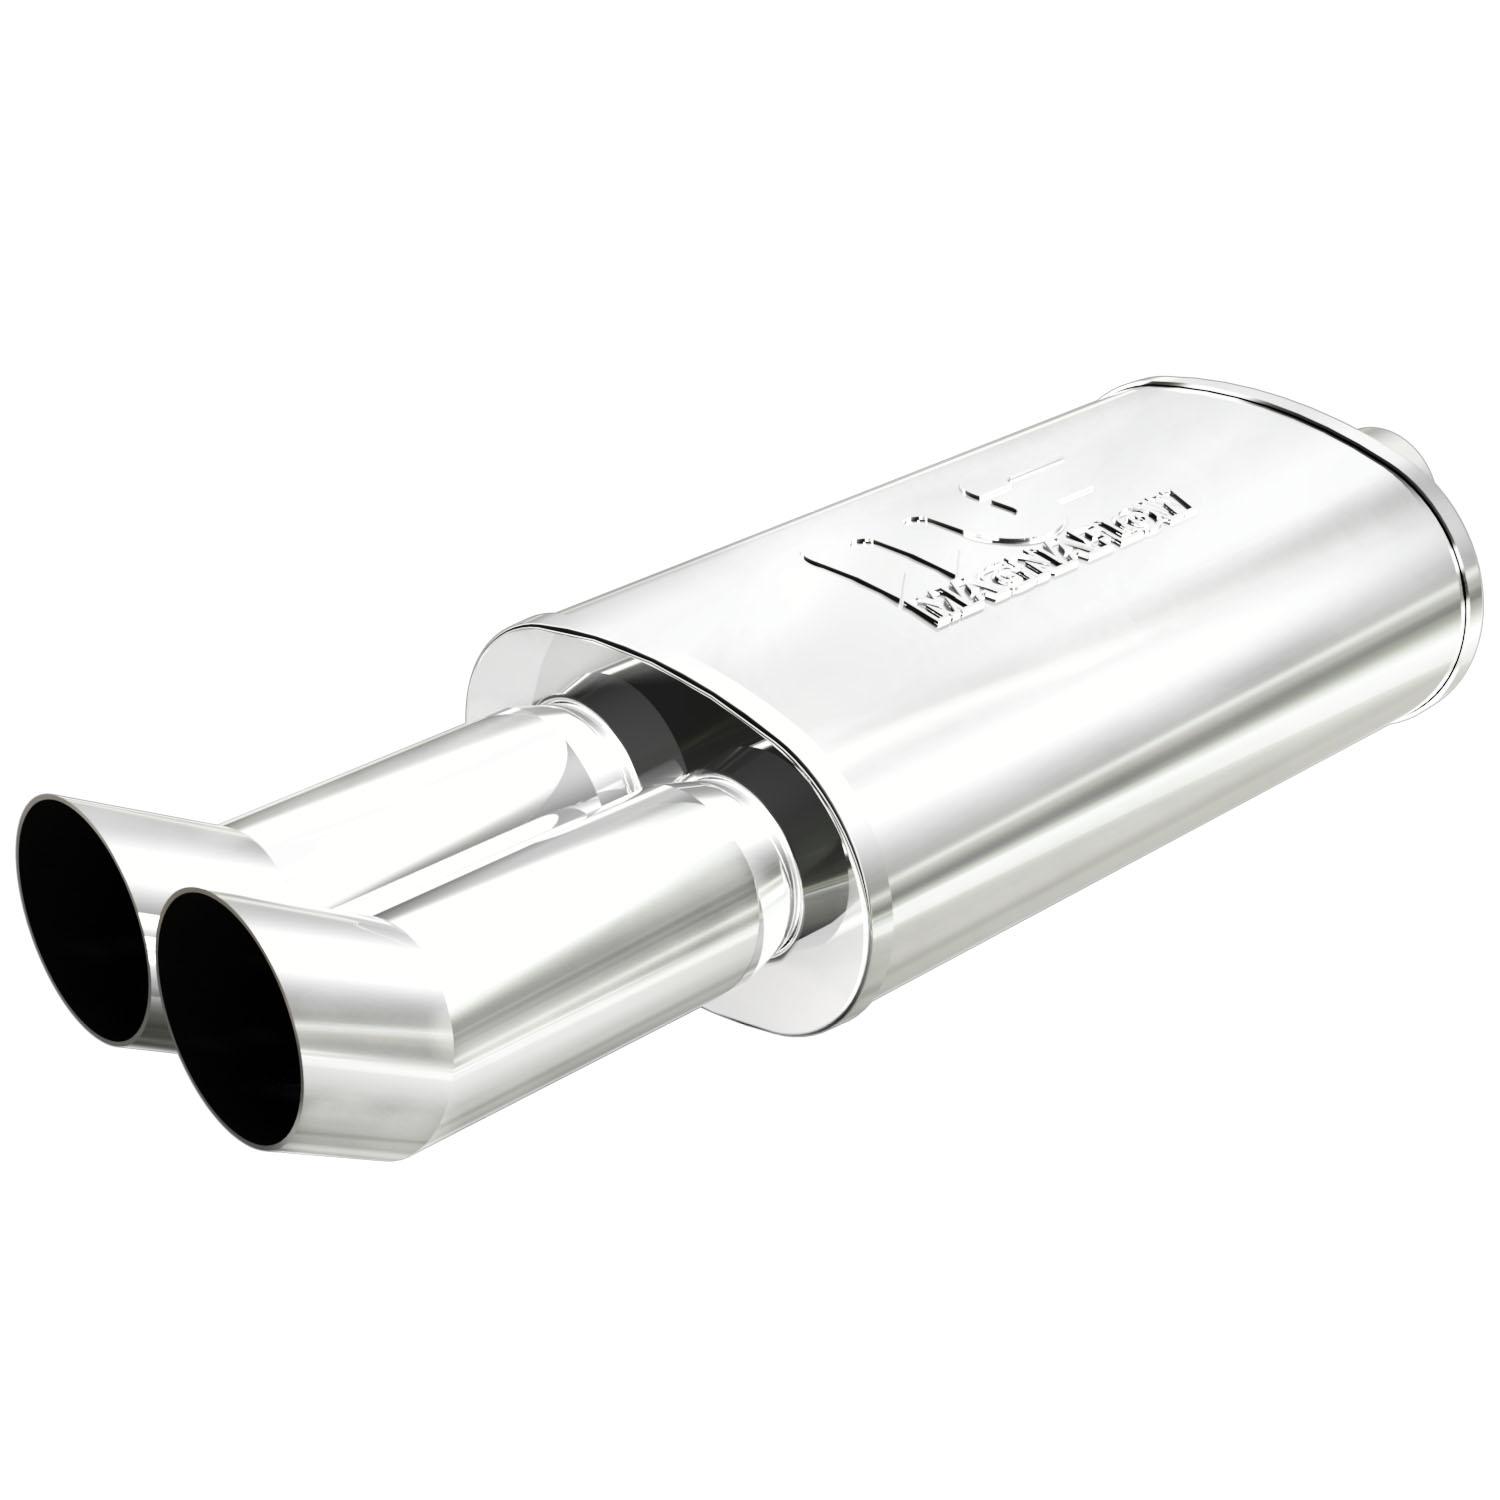 universal-performance-muffler-with-tip-2-25in